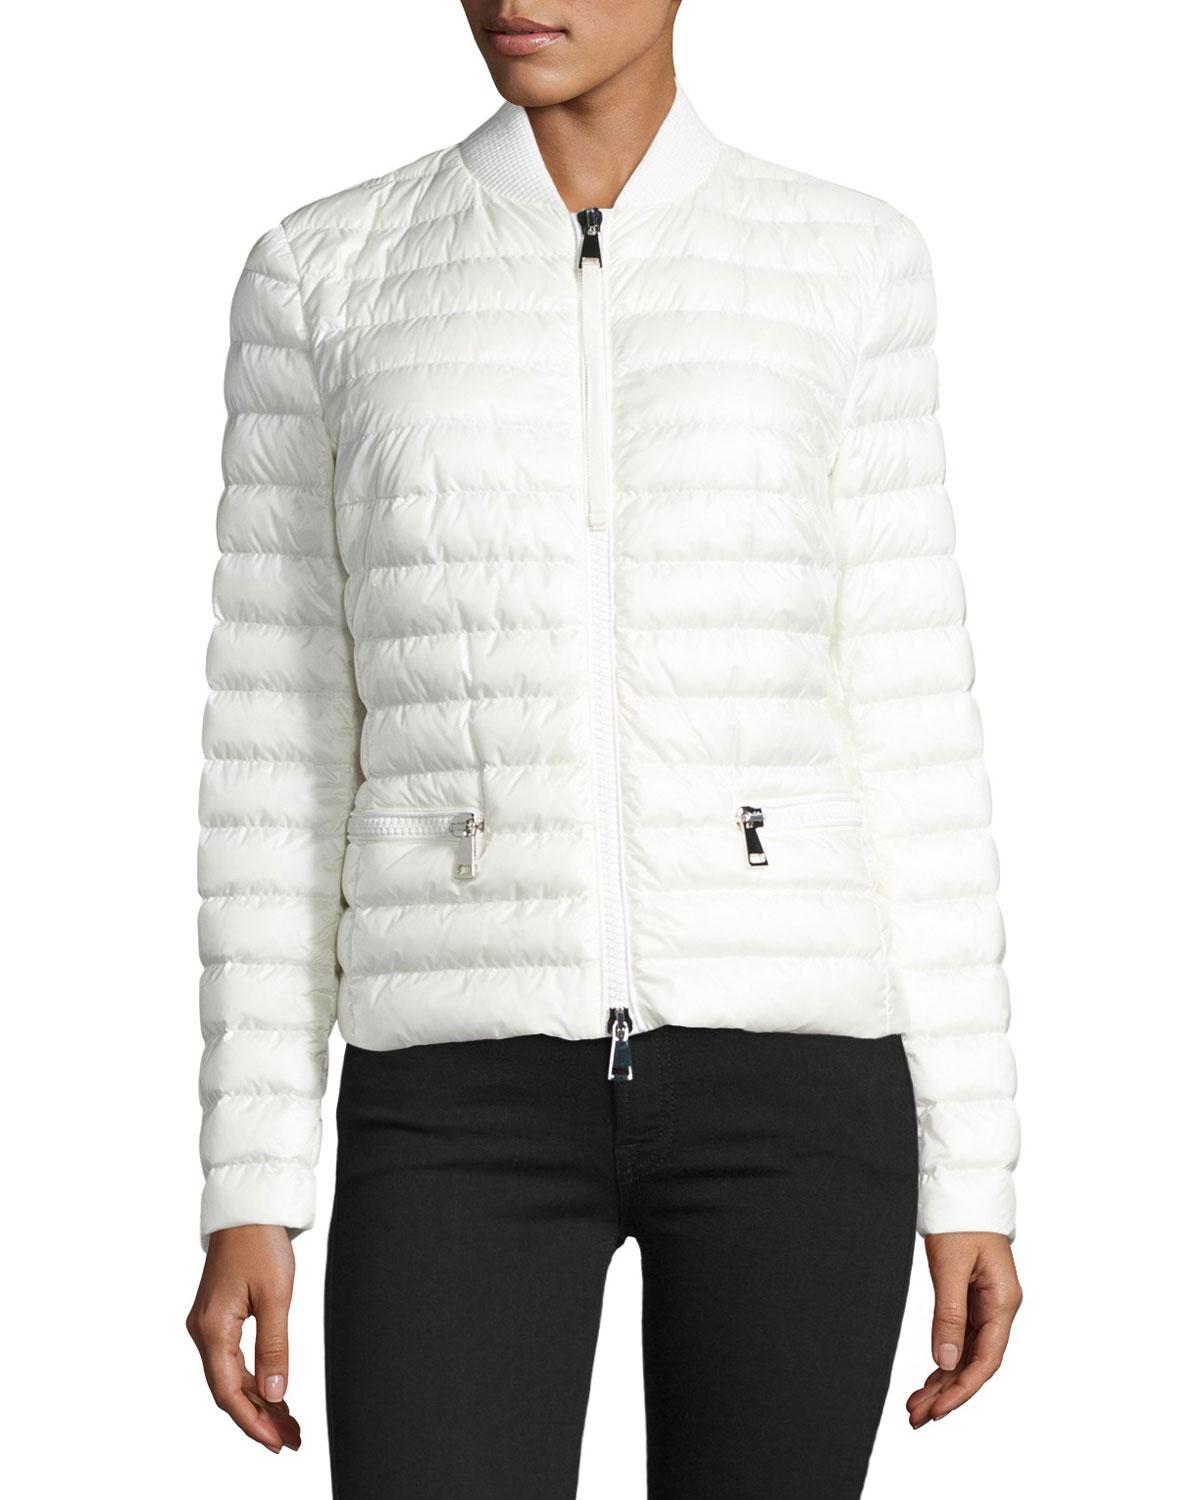 Lyst - Moncler Blen Fitted Down Jacket in White